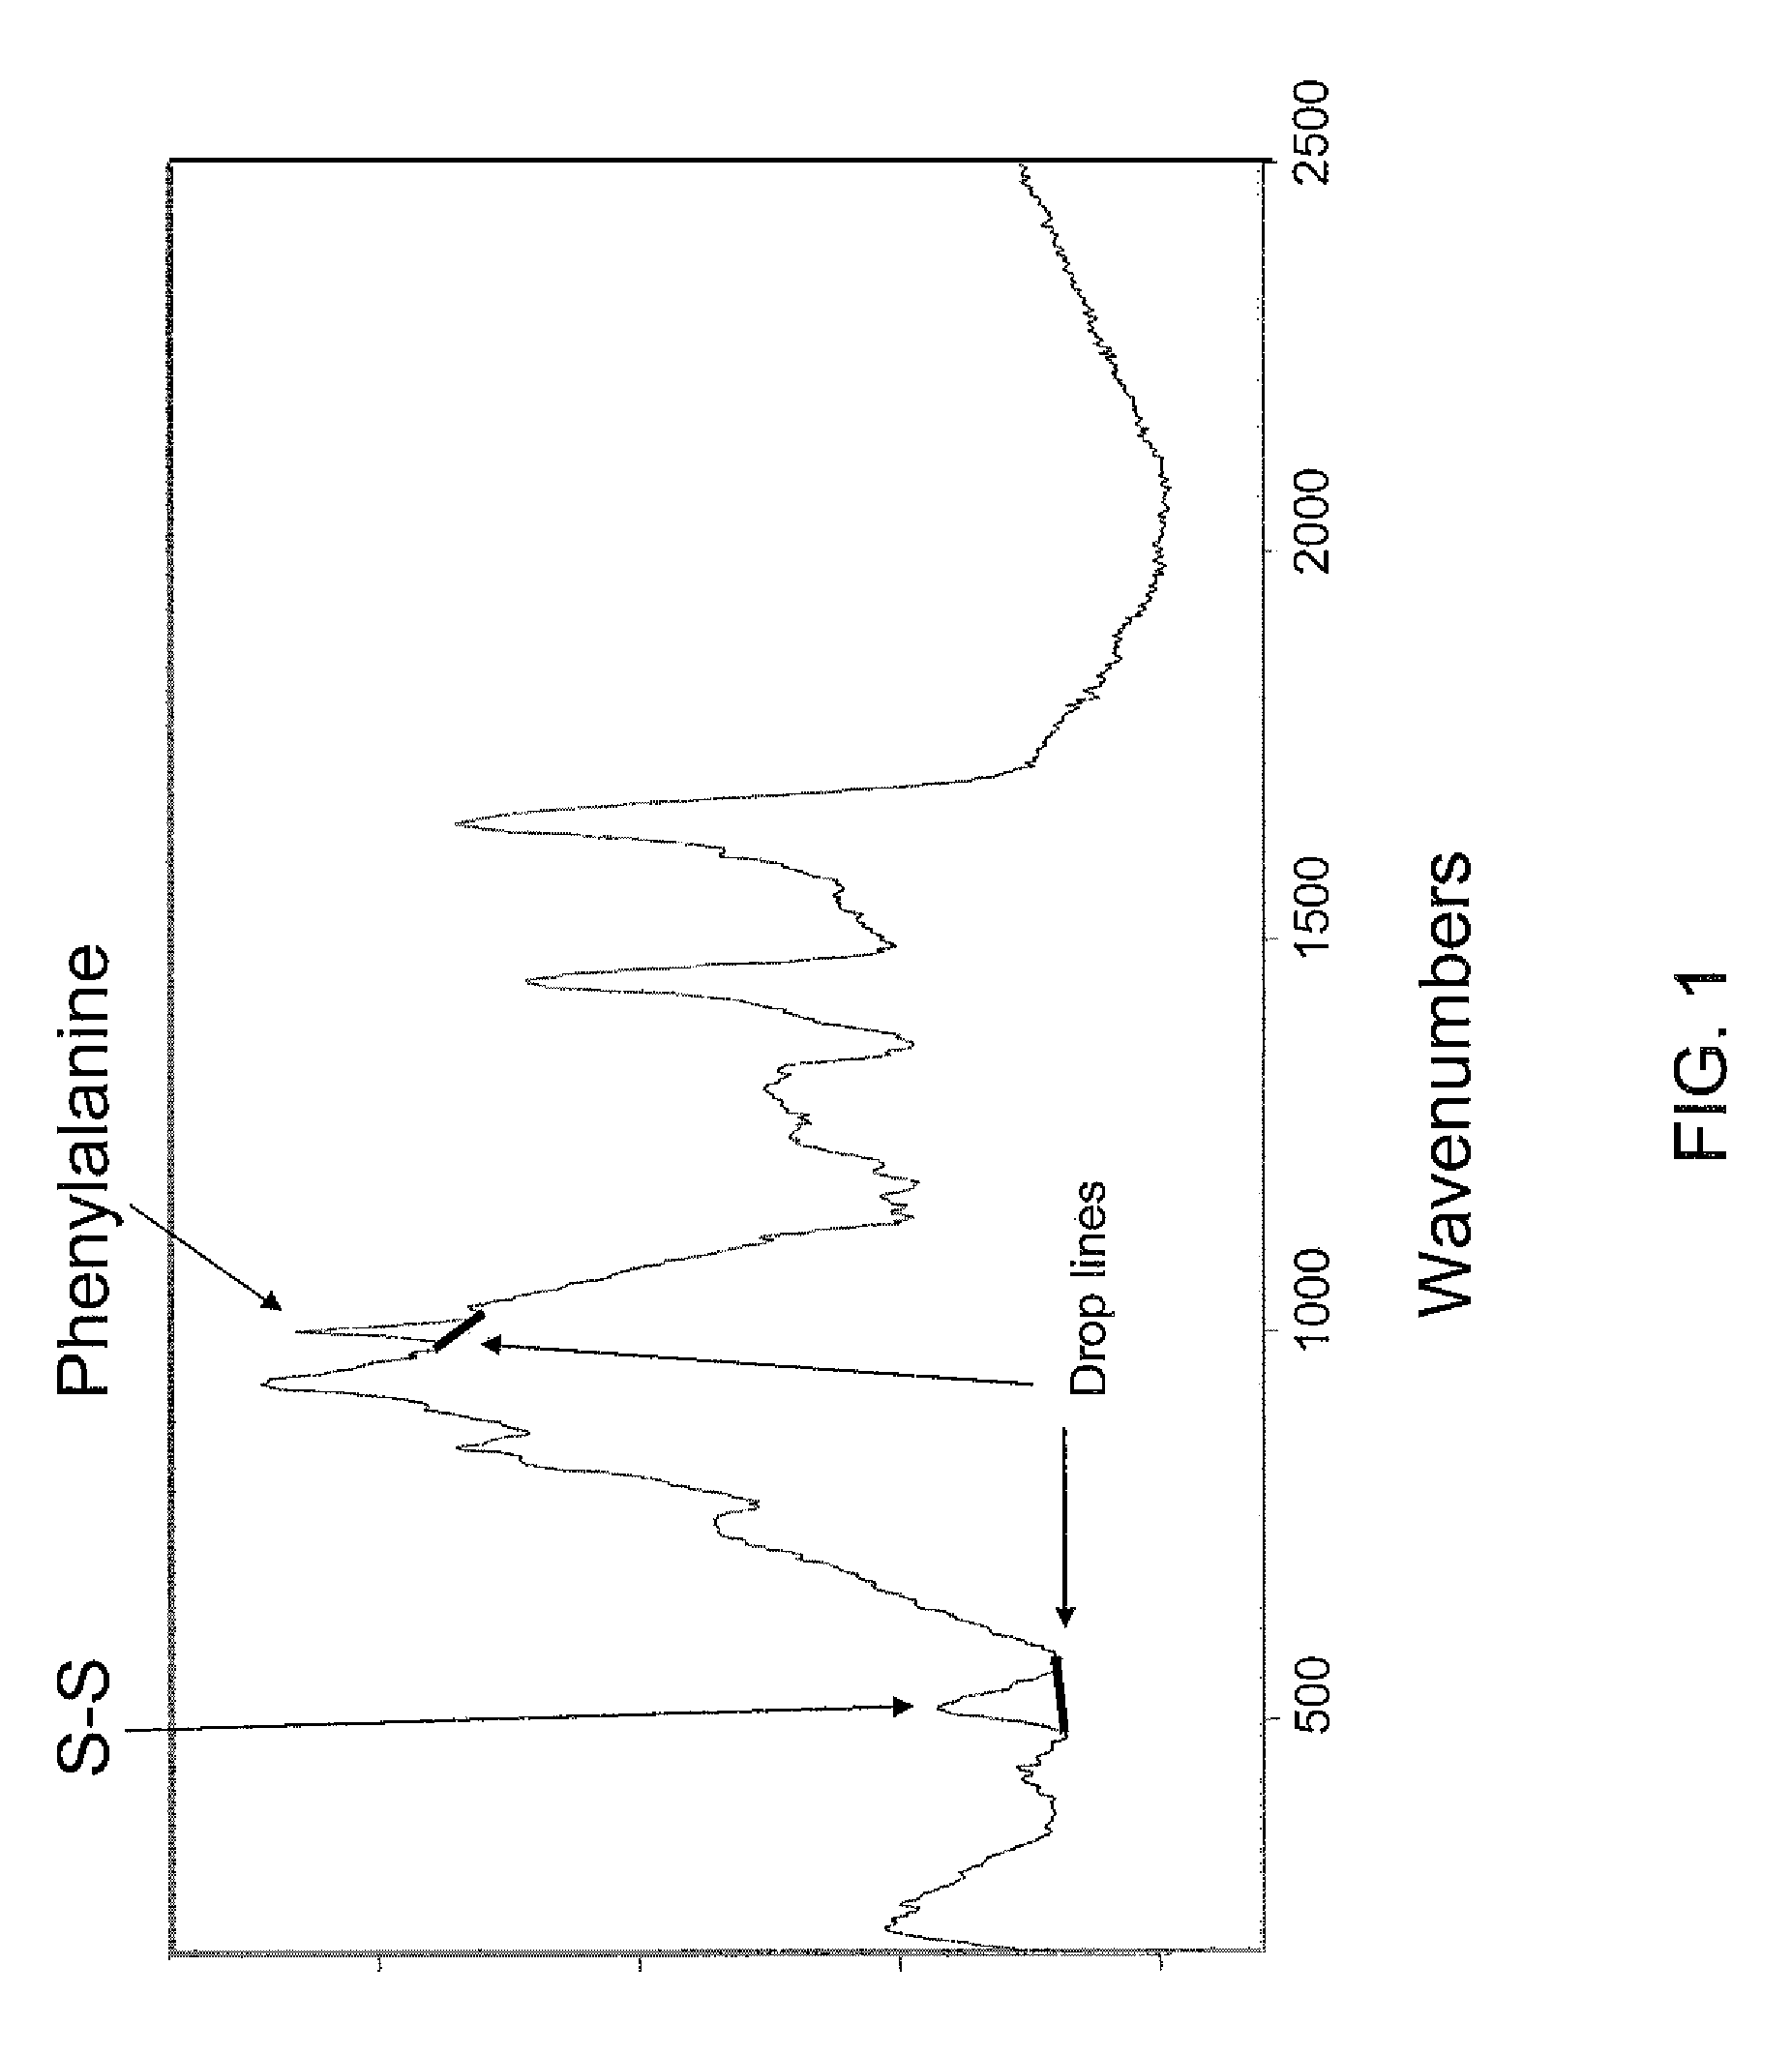 Method and apparatus for determination of bone fracture risk using raman spectroscopy